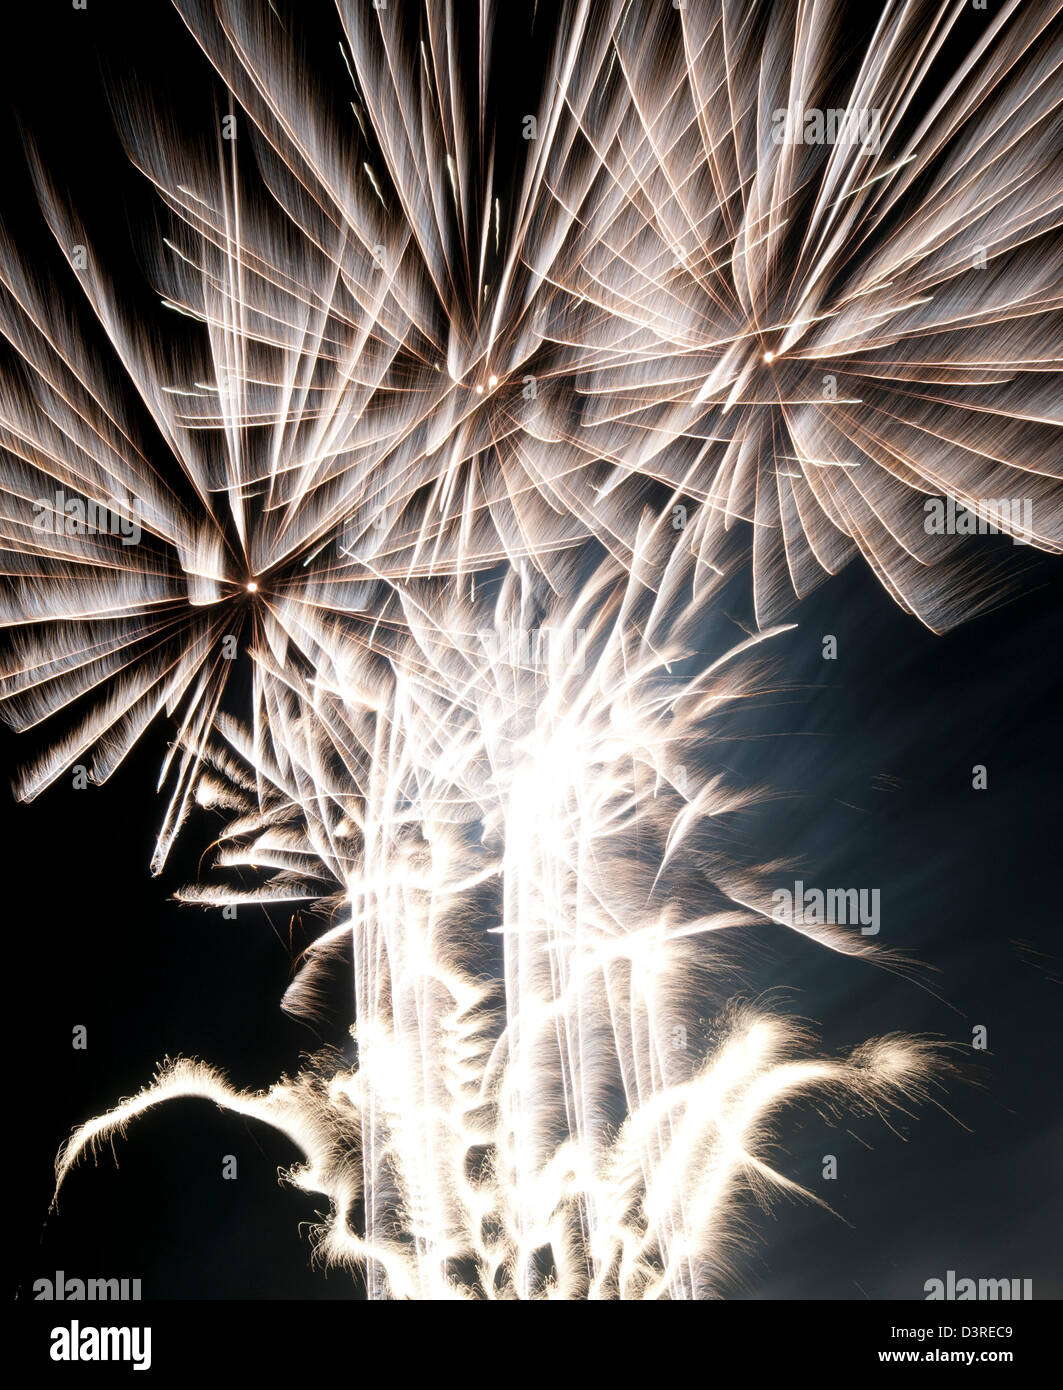 Fireworks, flare, explosions Stock Photo